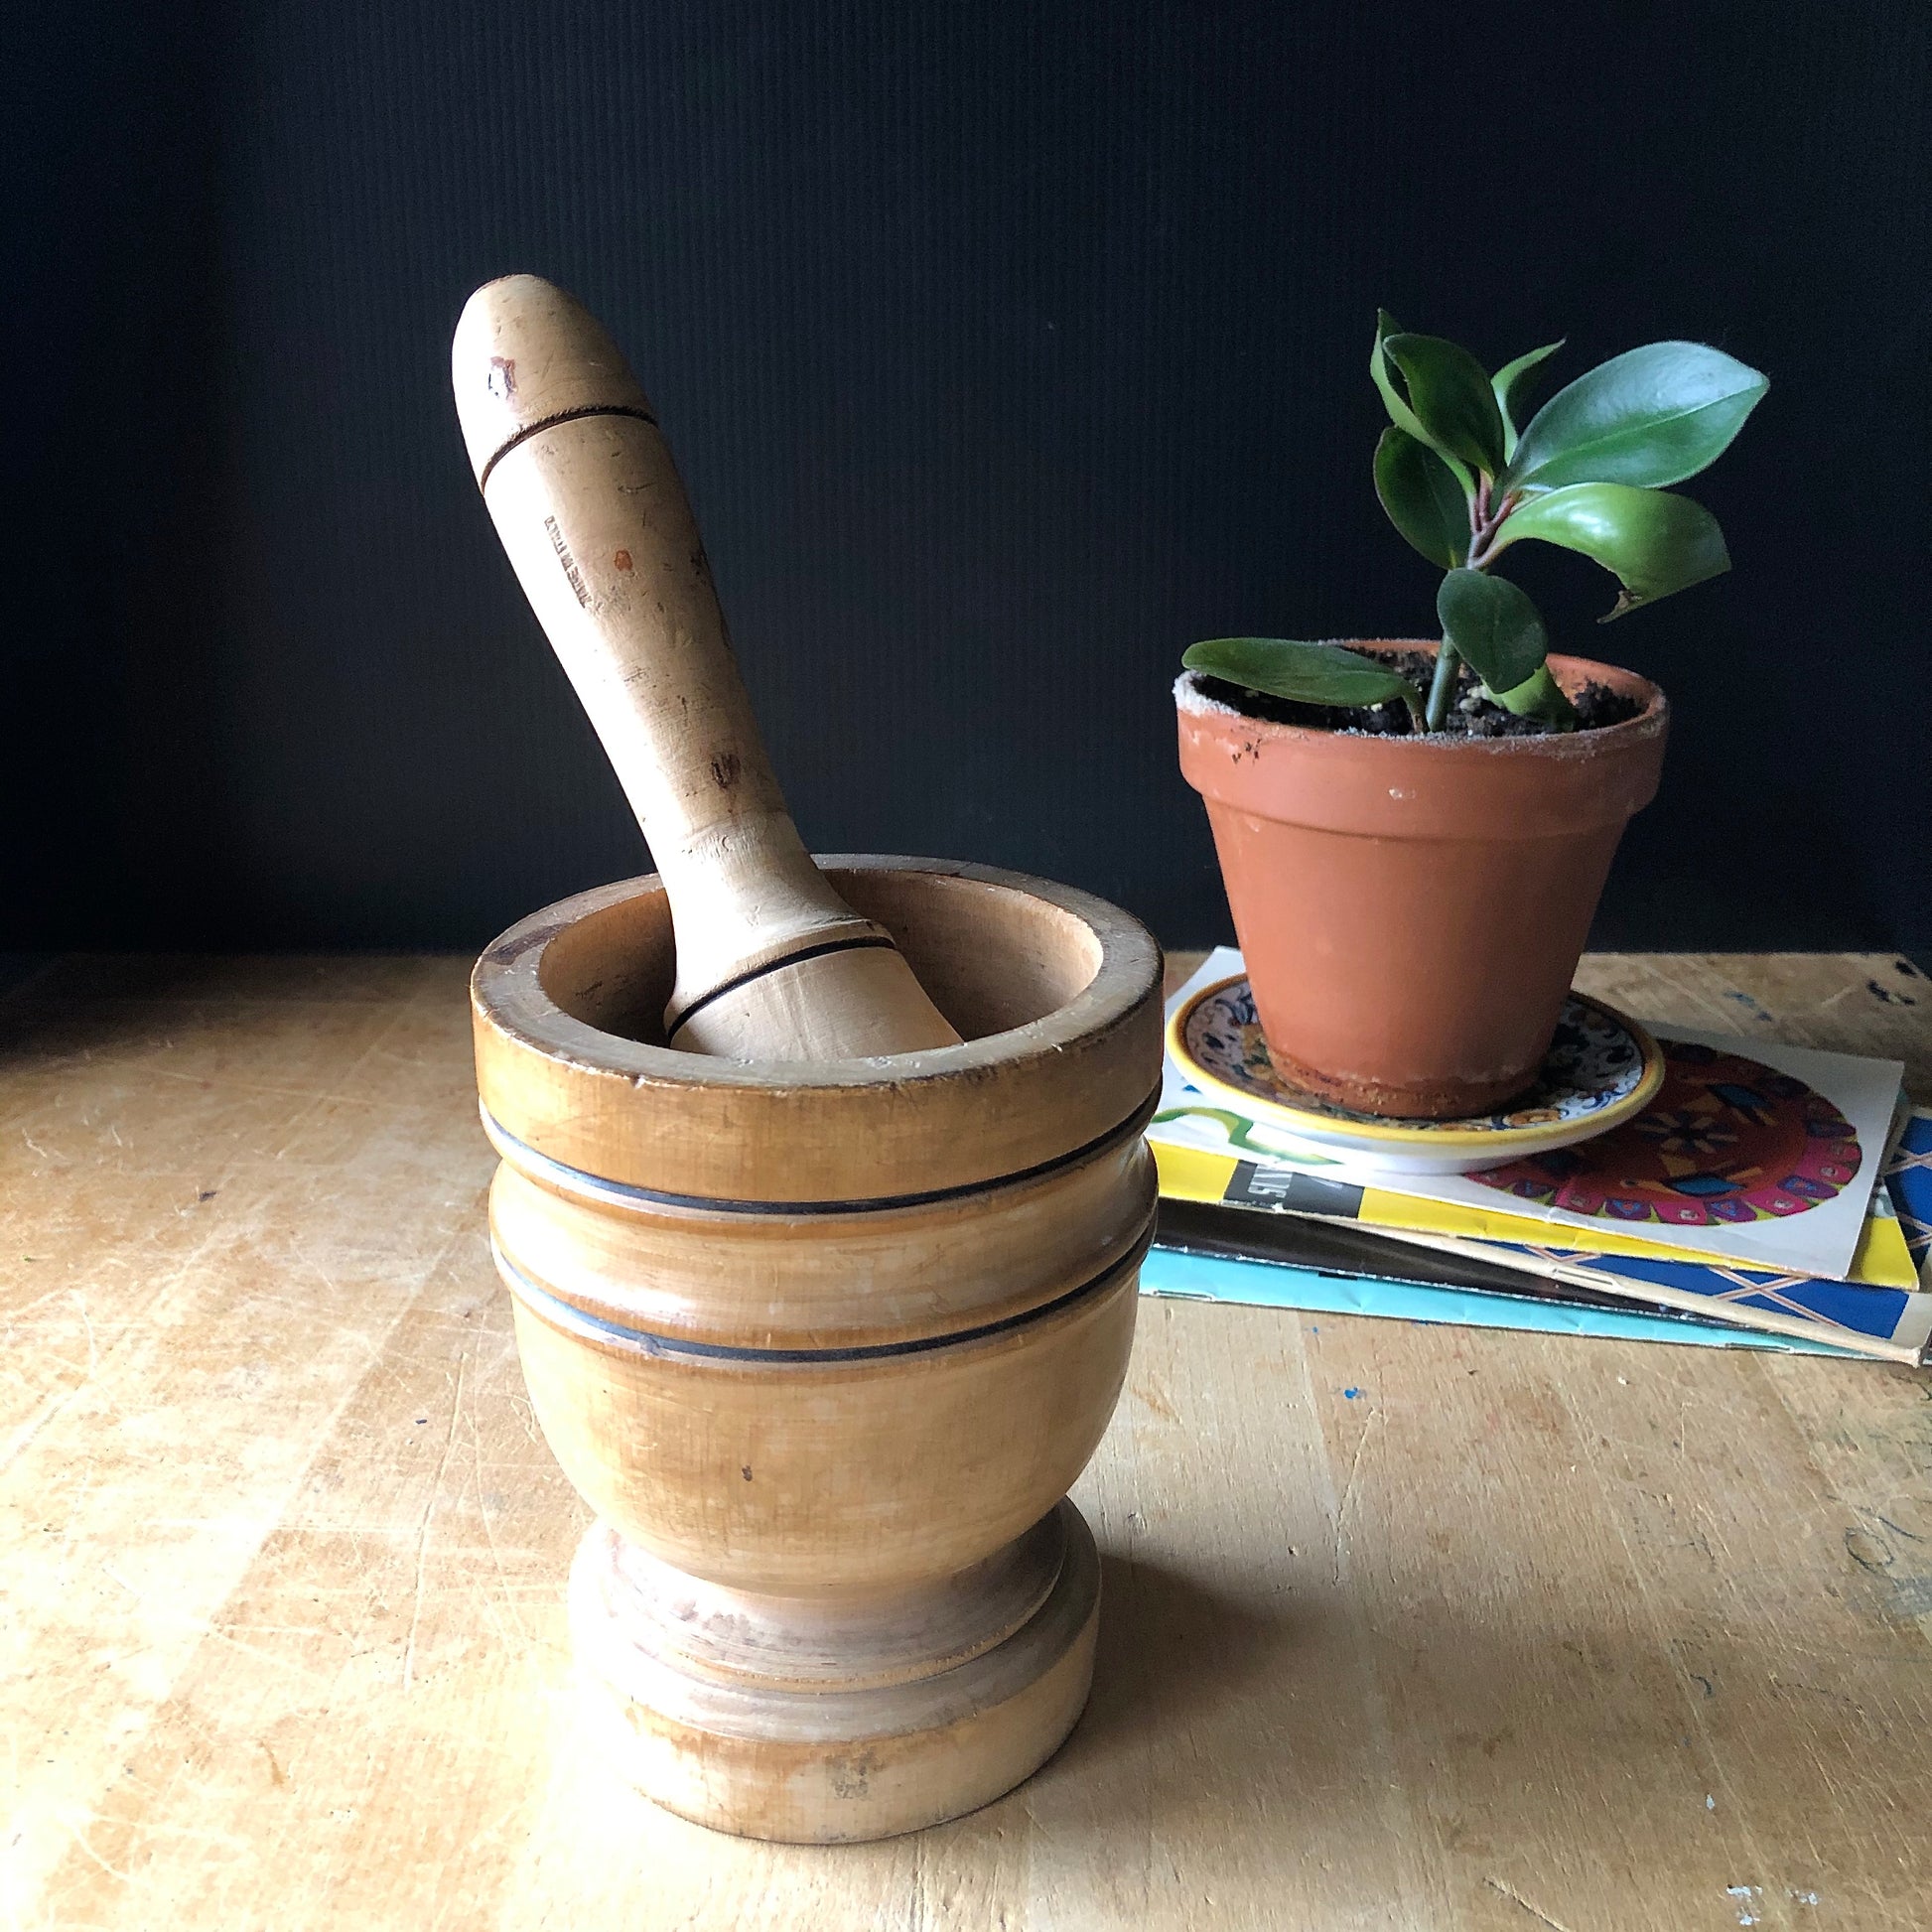 Wooden Mortar and Pestle from Italy | Vintage Kitchen Utensils